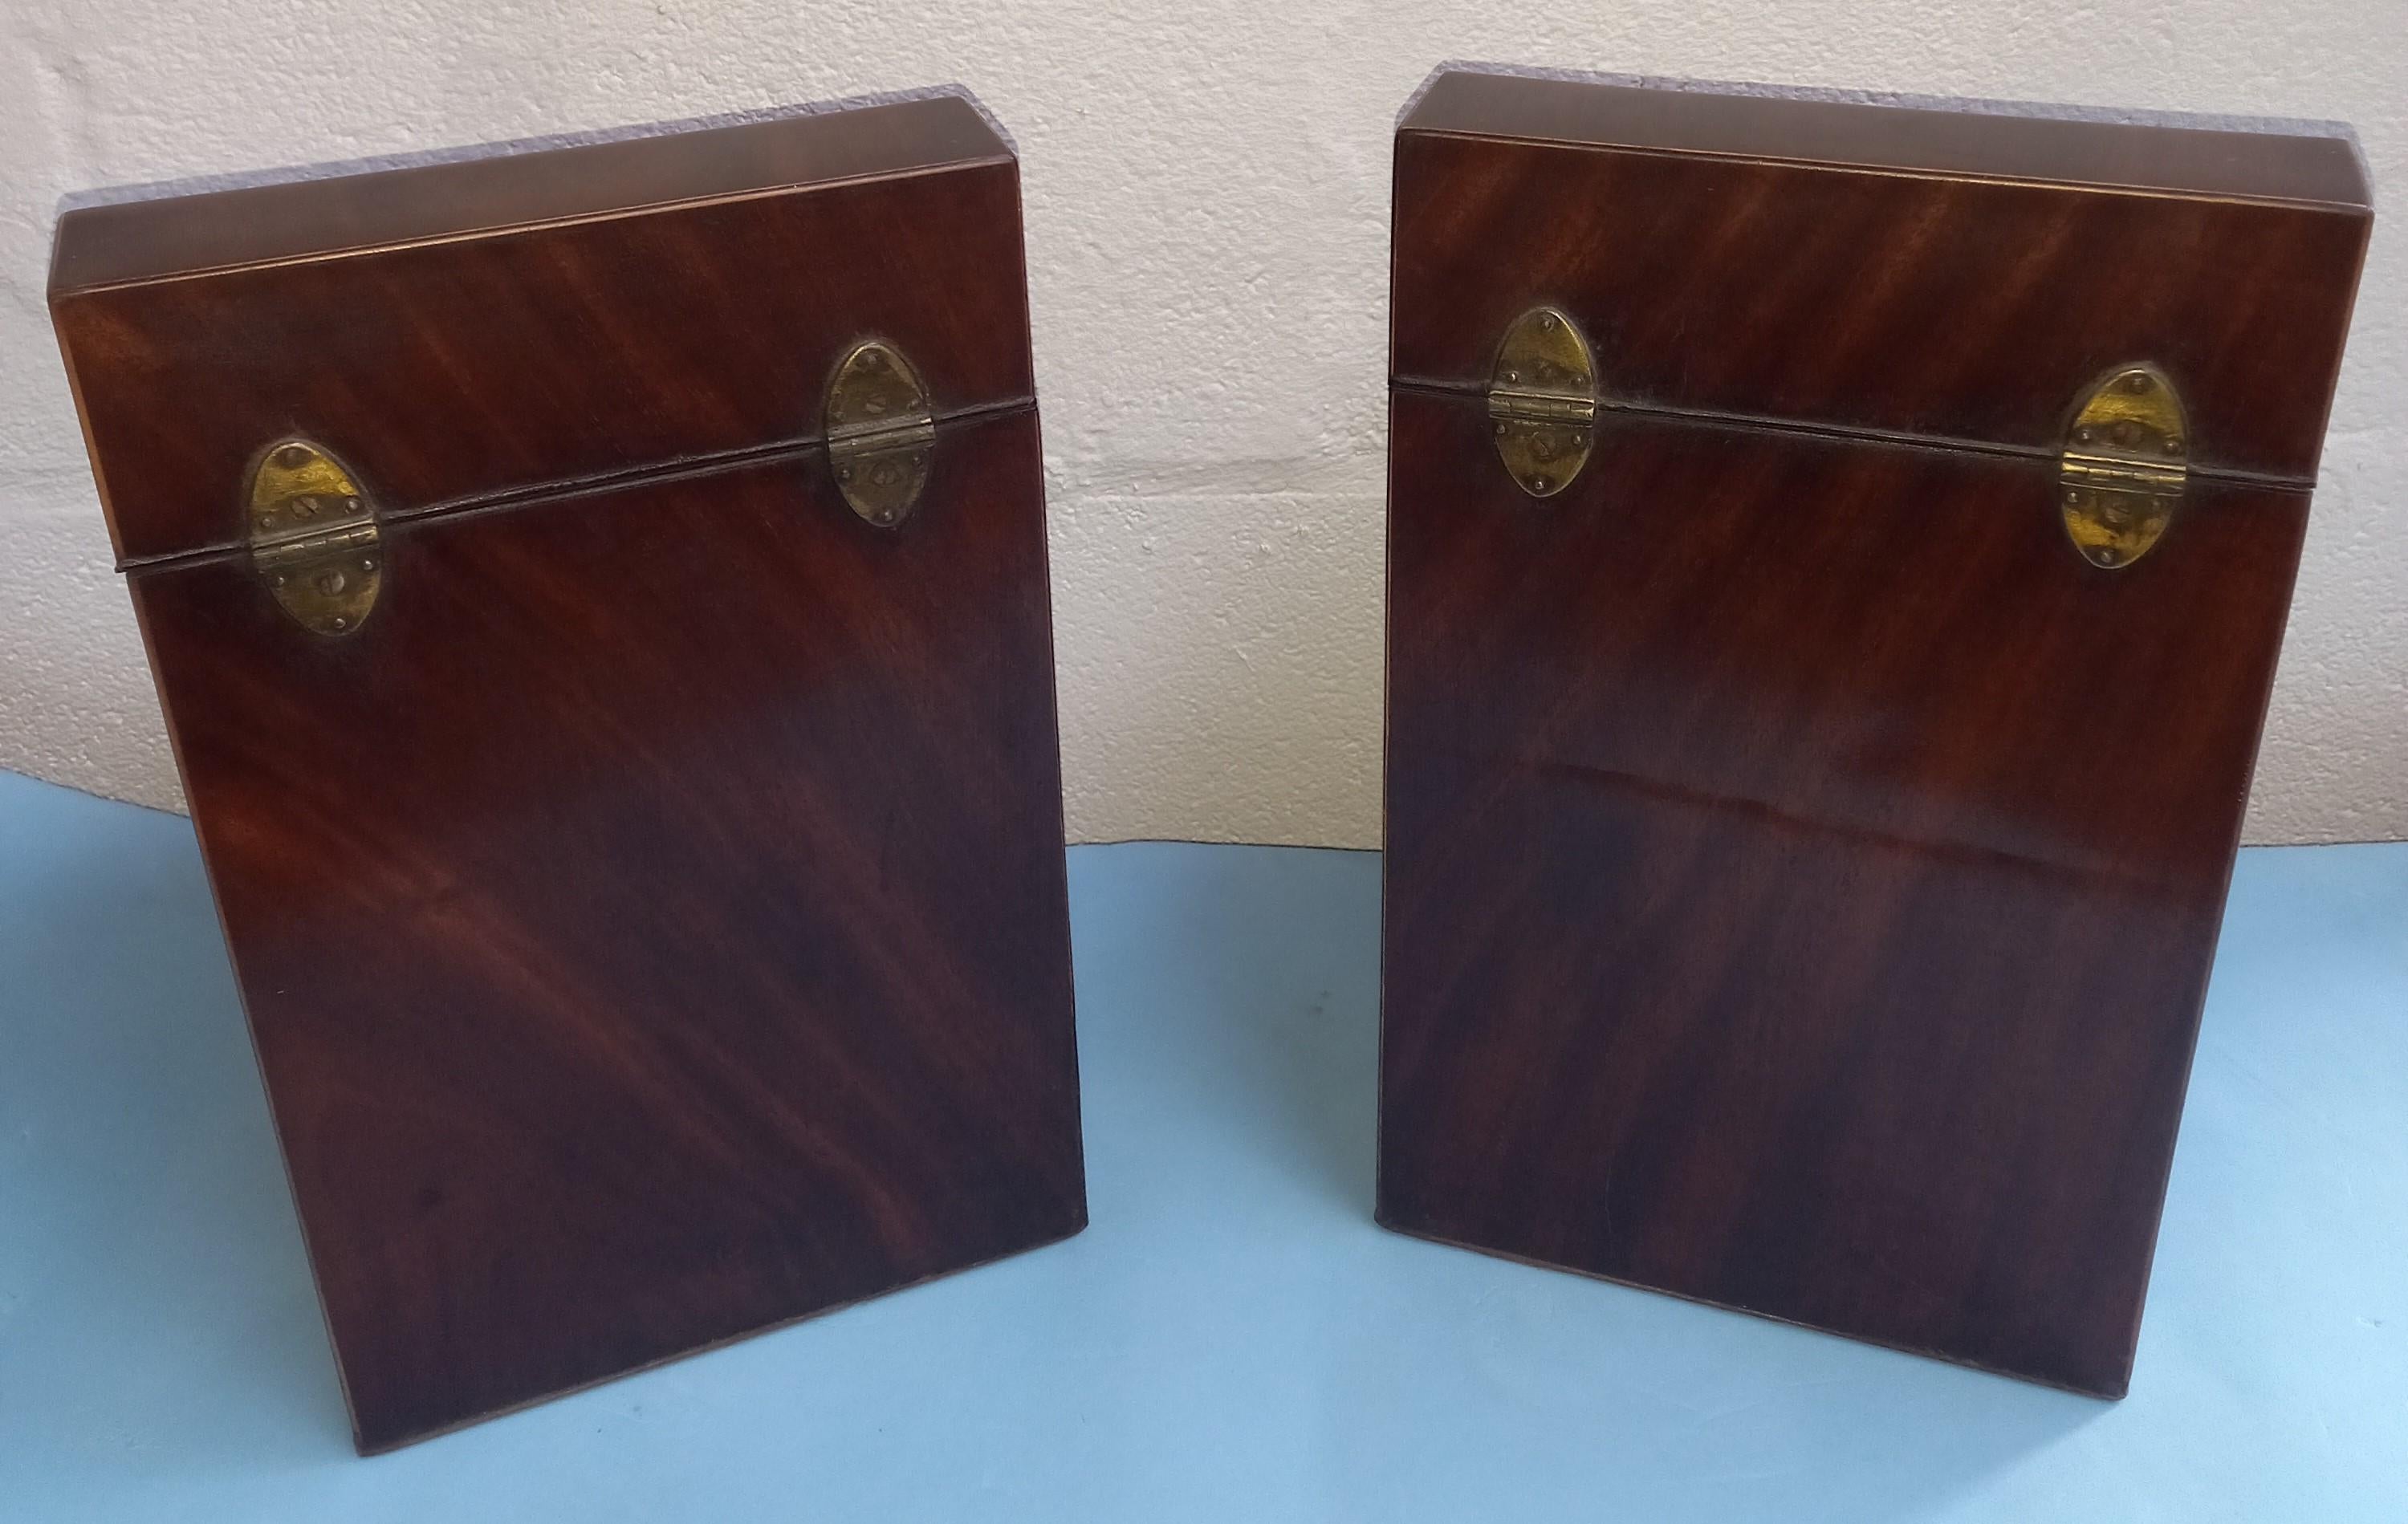 George III Pair of Knife Boxes /Cutlery Cases